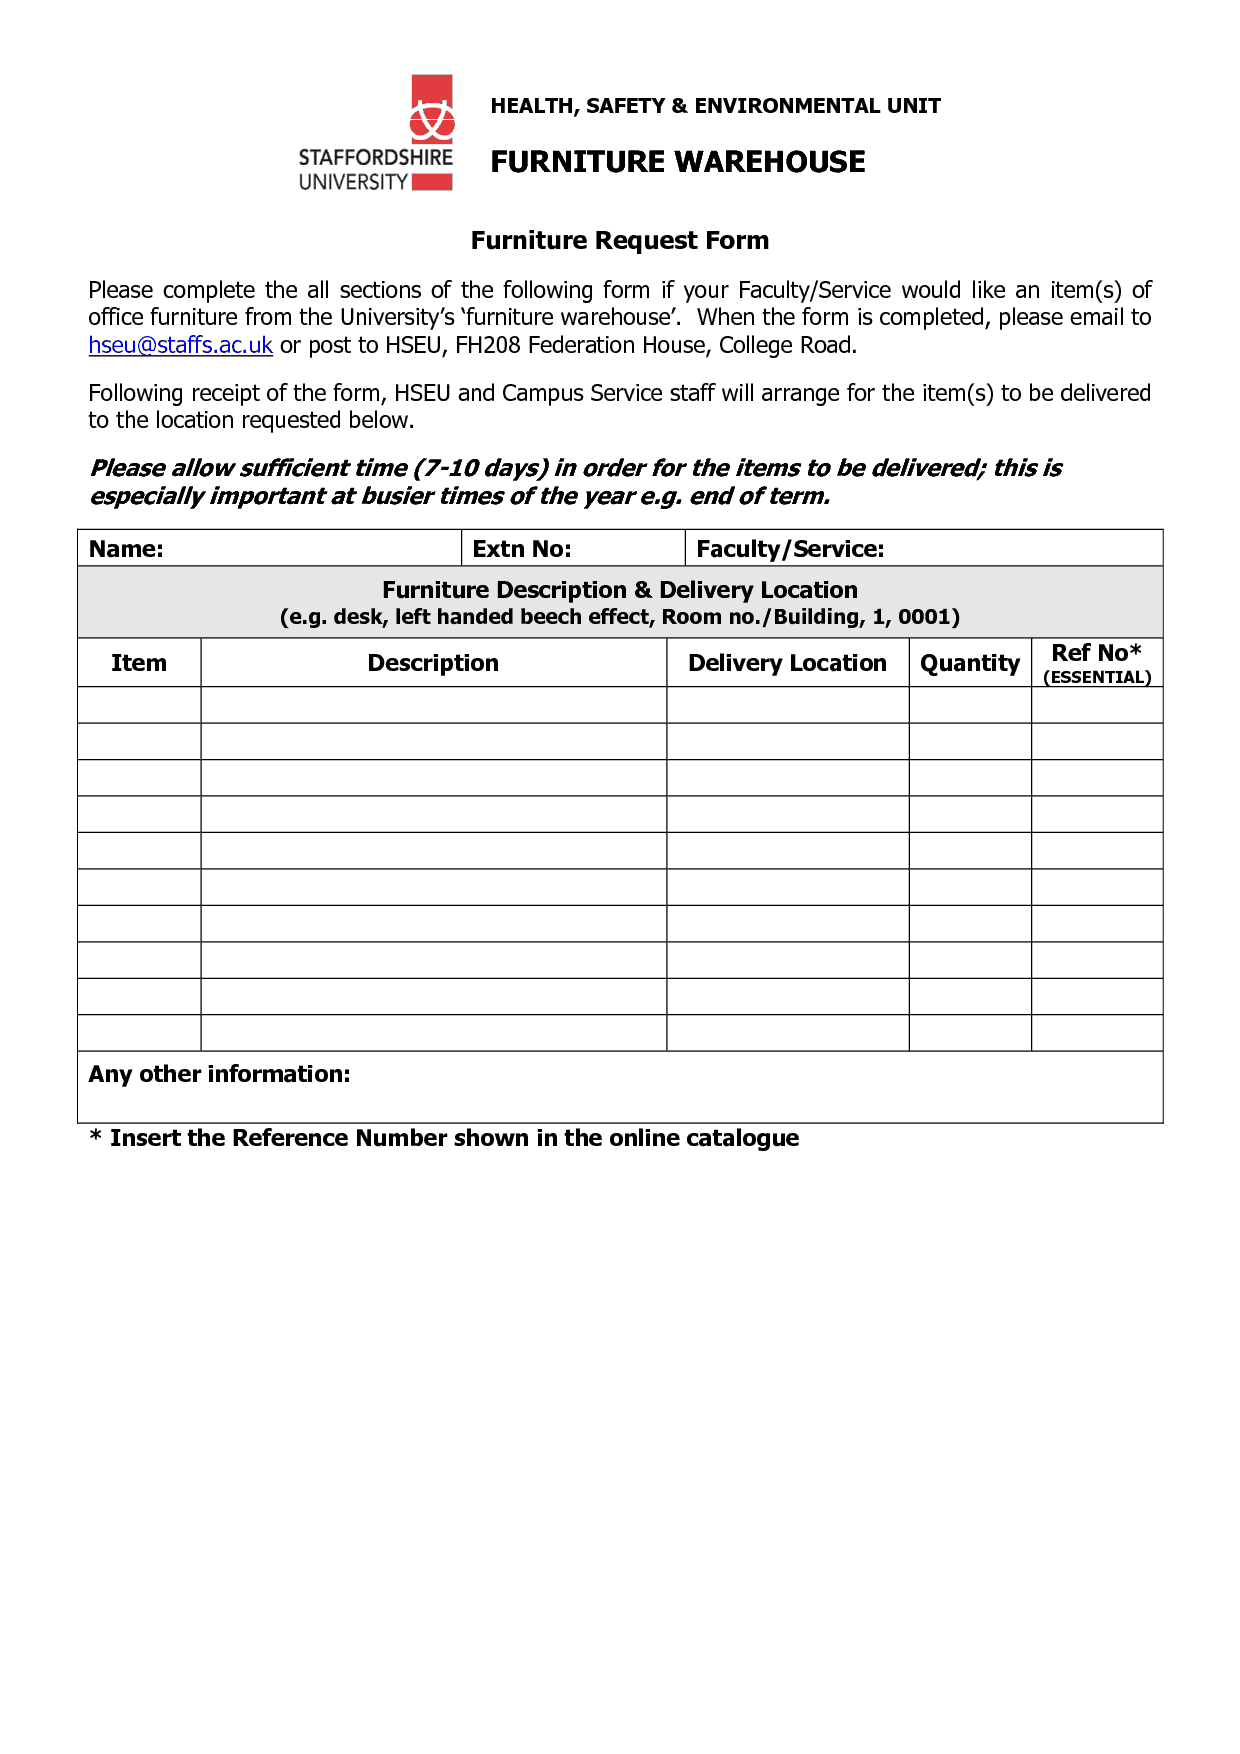 printable-donation-form-template-printable-forms-free-online